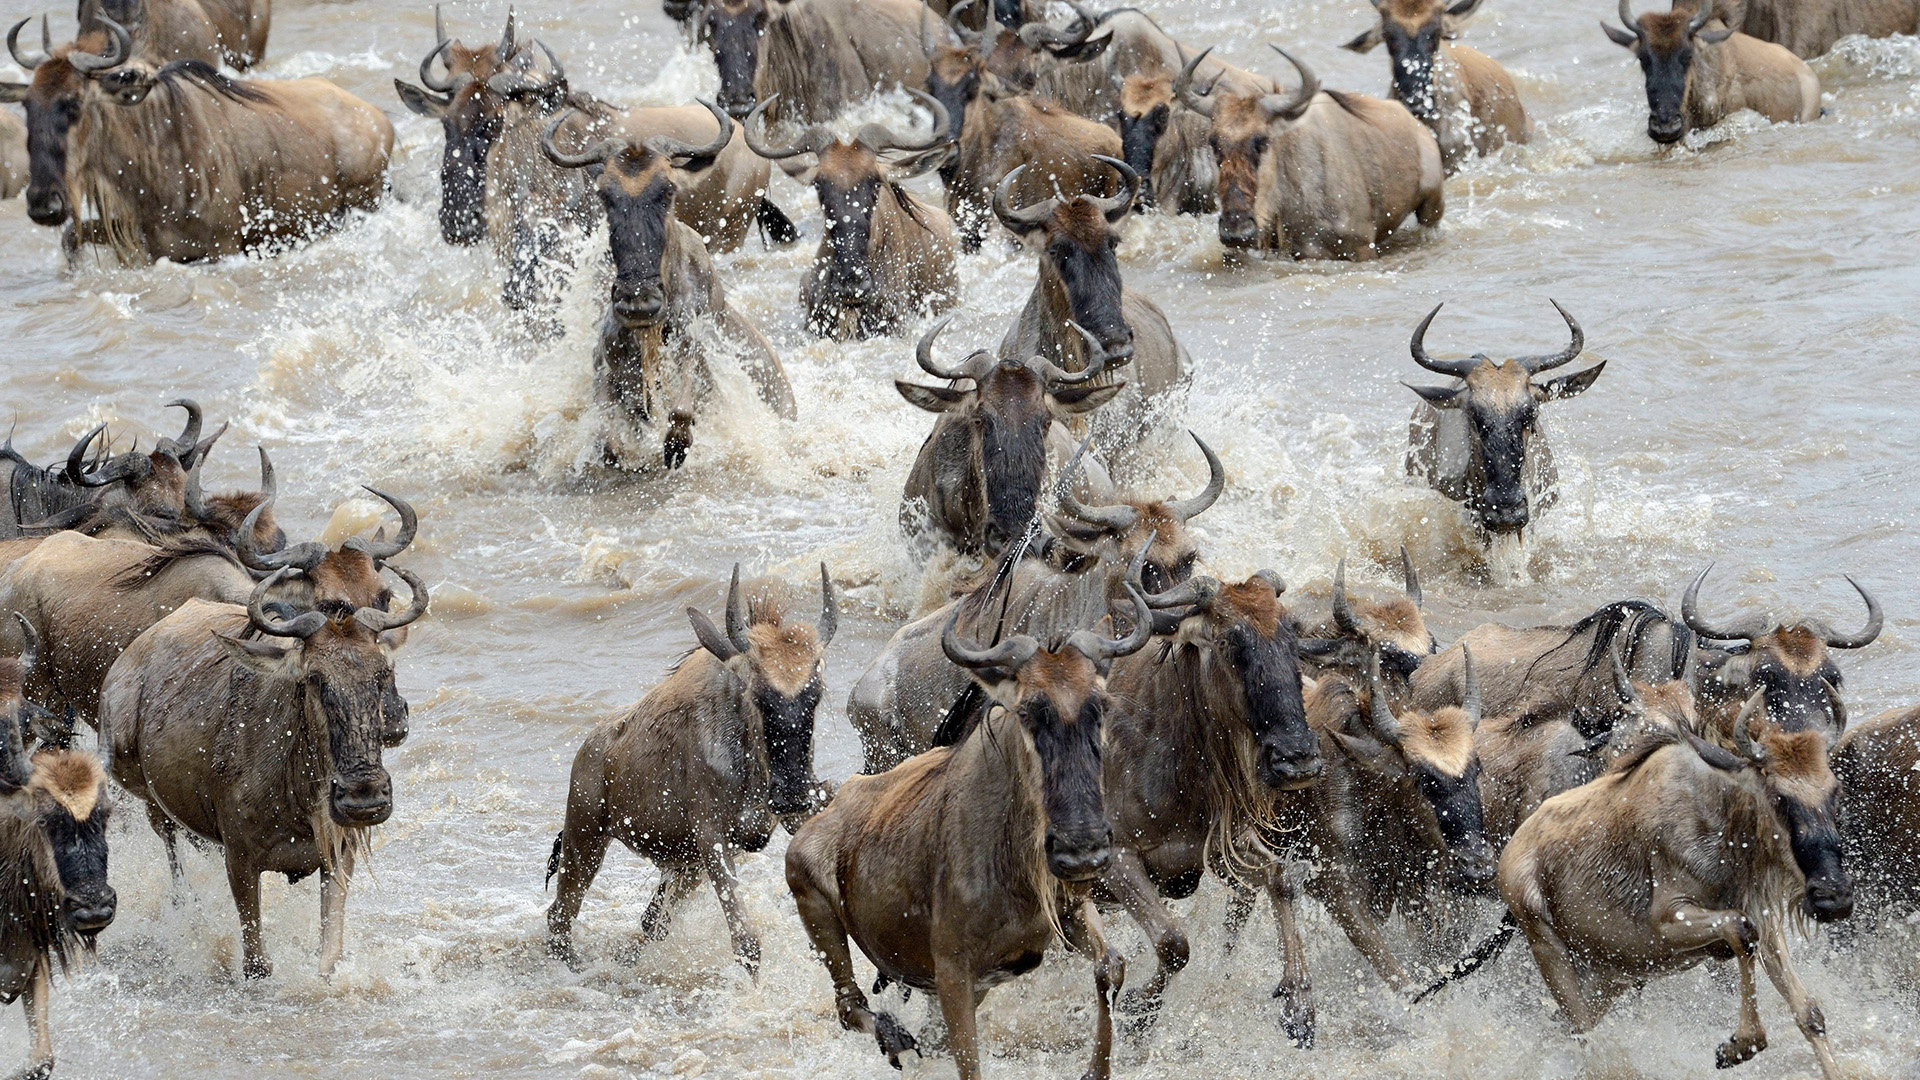 Crossing waterways is an extremely dangerous activity for wildebeest which must battle hungry... [Photo of the day - January 2023]